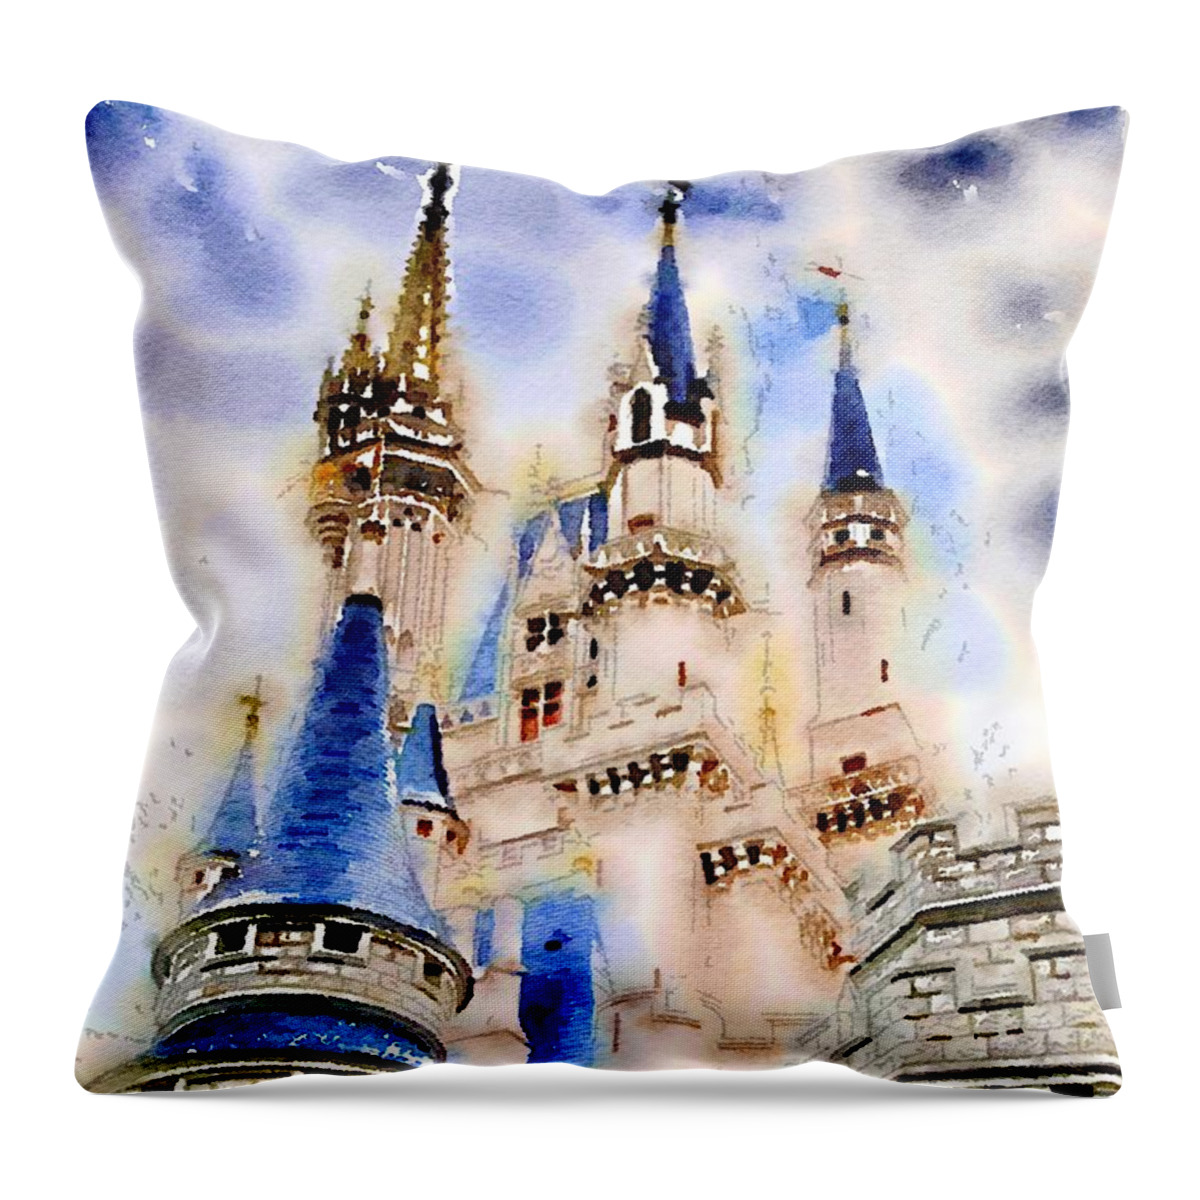 Castle Throw Pillow featuring the painting Sleeping Beauty Castle by HELGE Art Gallery